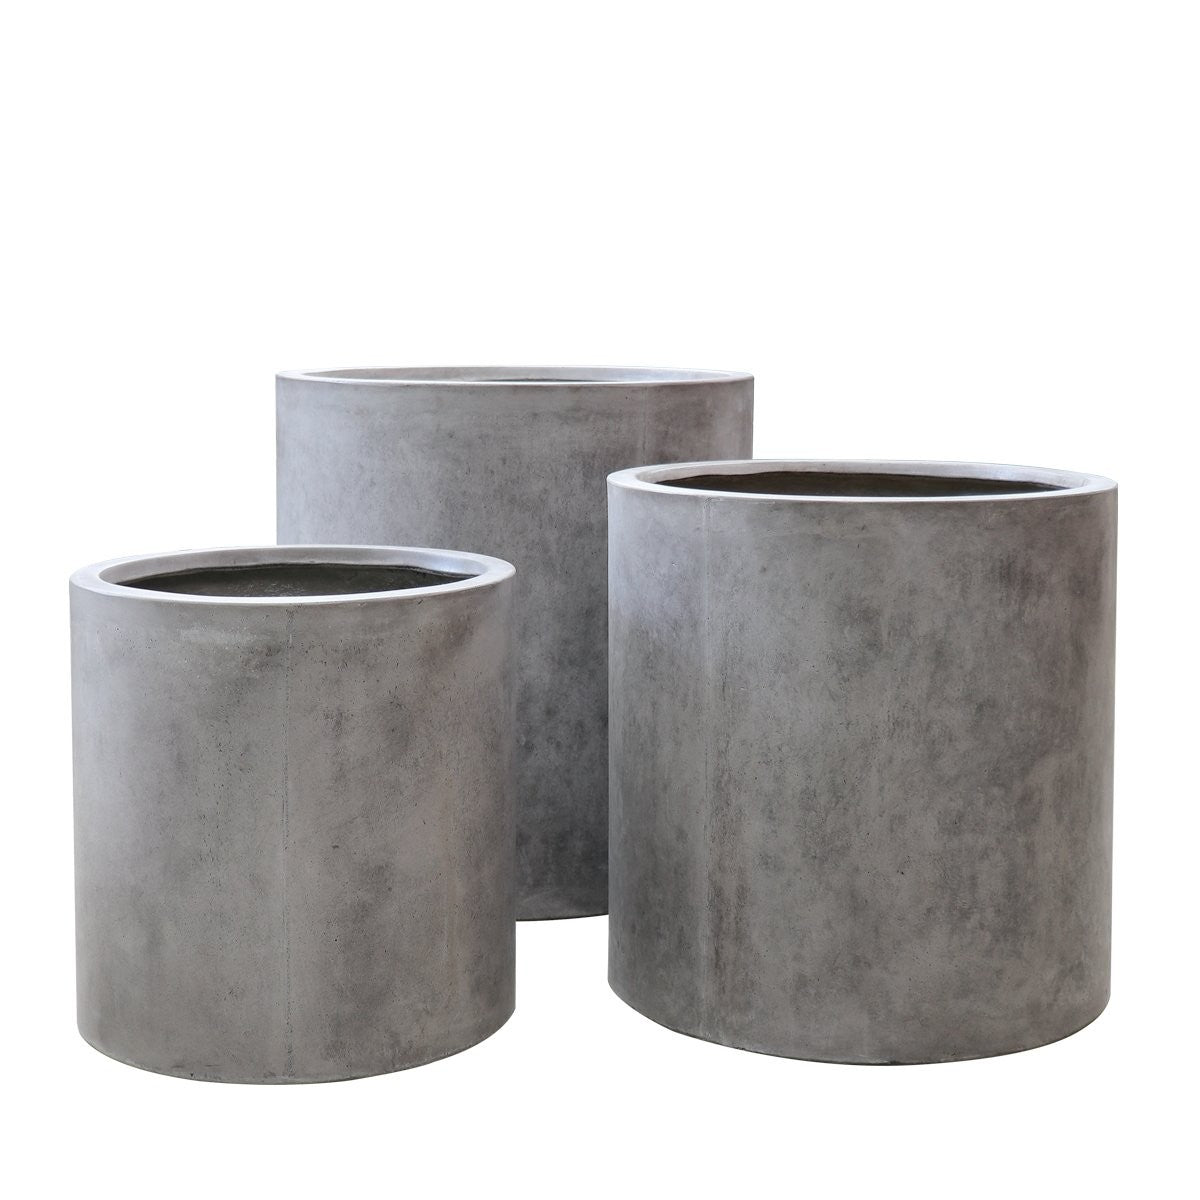 Mikonui Cylinder Planter- Weathered Cement